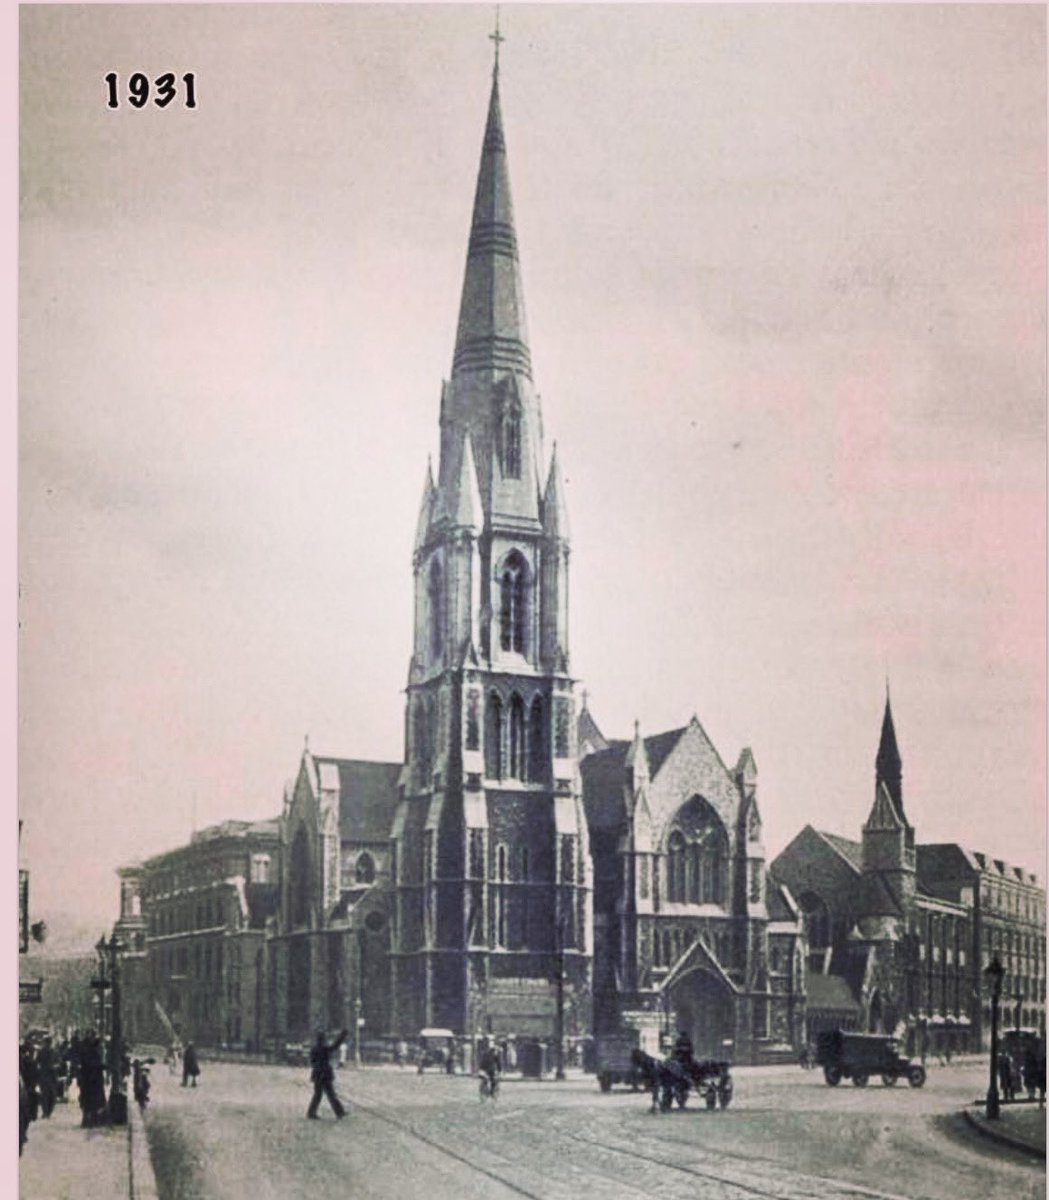 Christ Church, Lambeth North (across from the tube), c1931. Only the tower and spire remain.